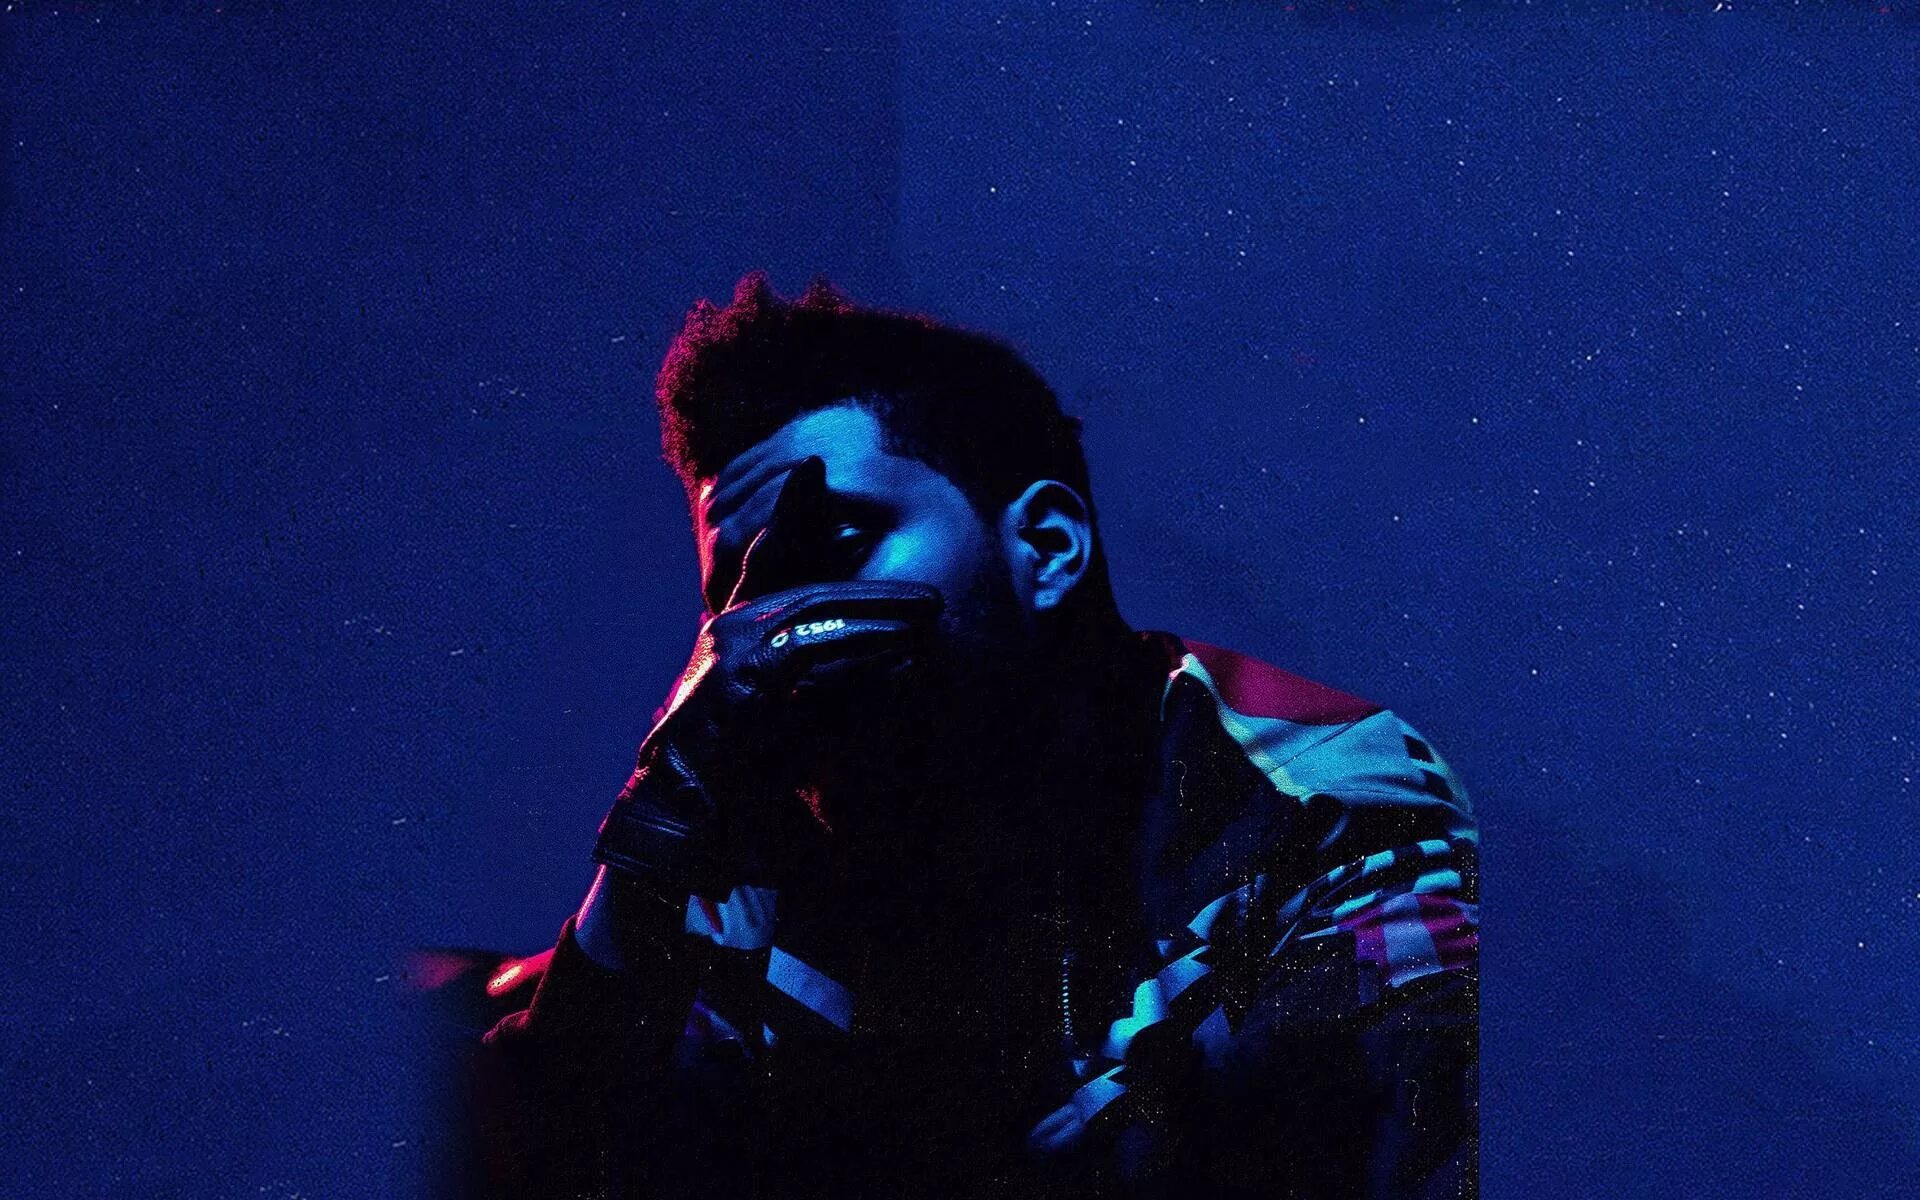 The Weeknd. The Weeknd 1920 1080. The Weeknd Wallpaper. The weekend out my name